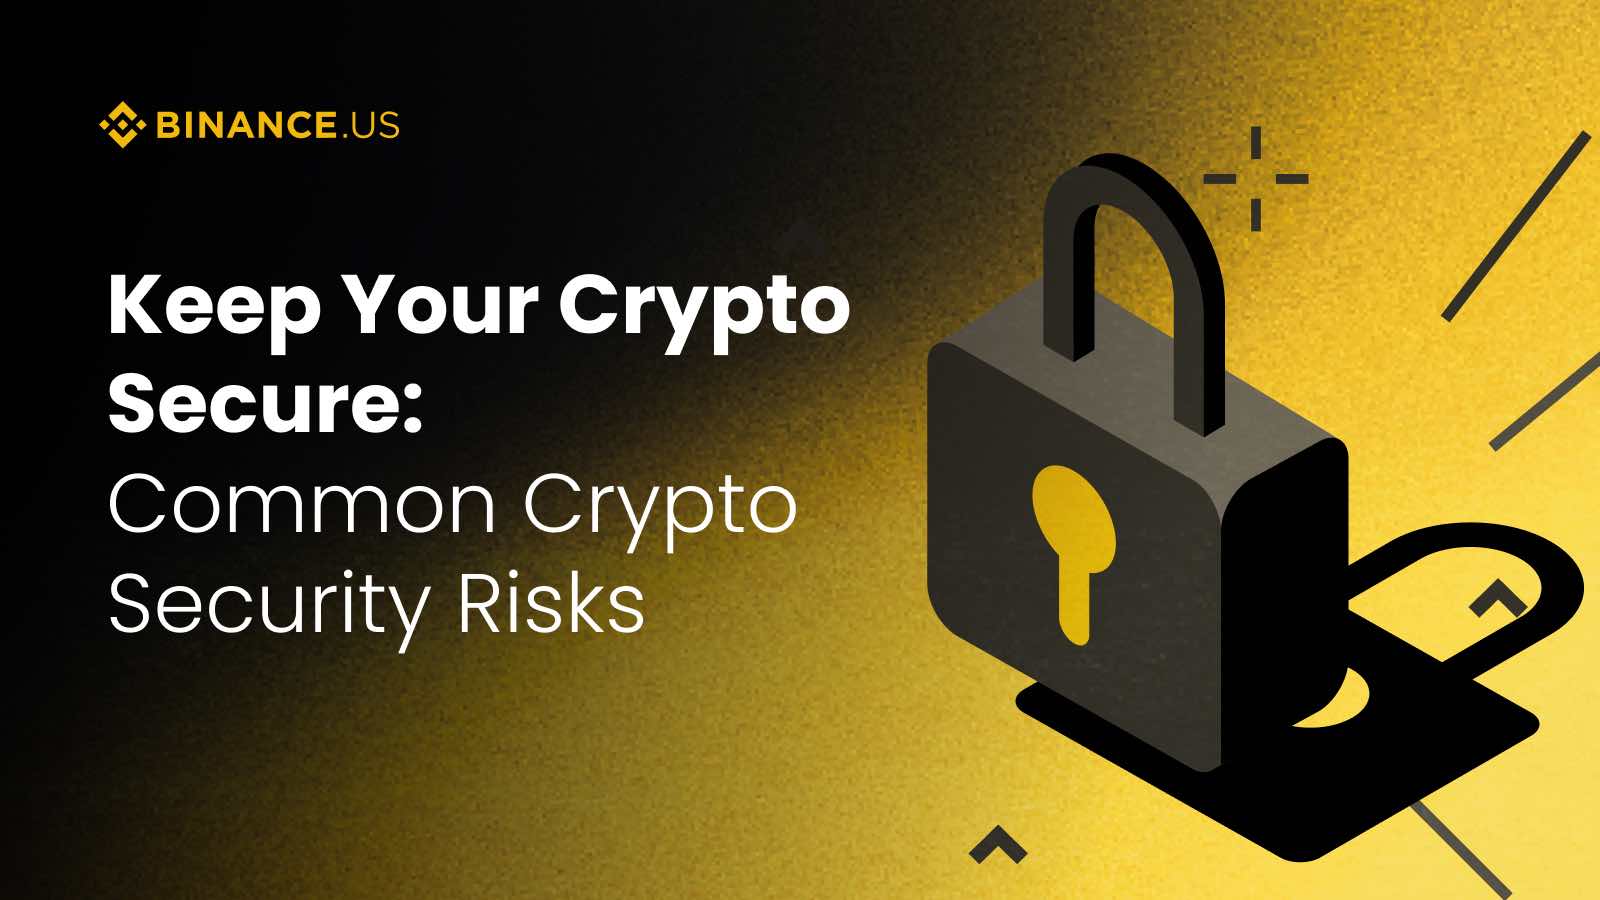 Keep Your Crypto Secure: Common Crypto Security Risks